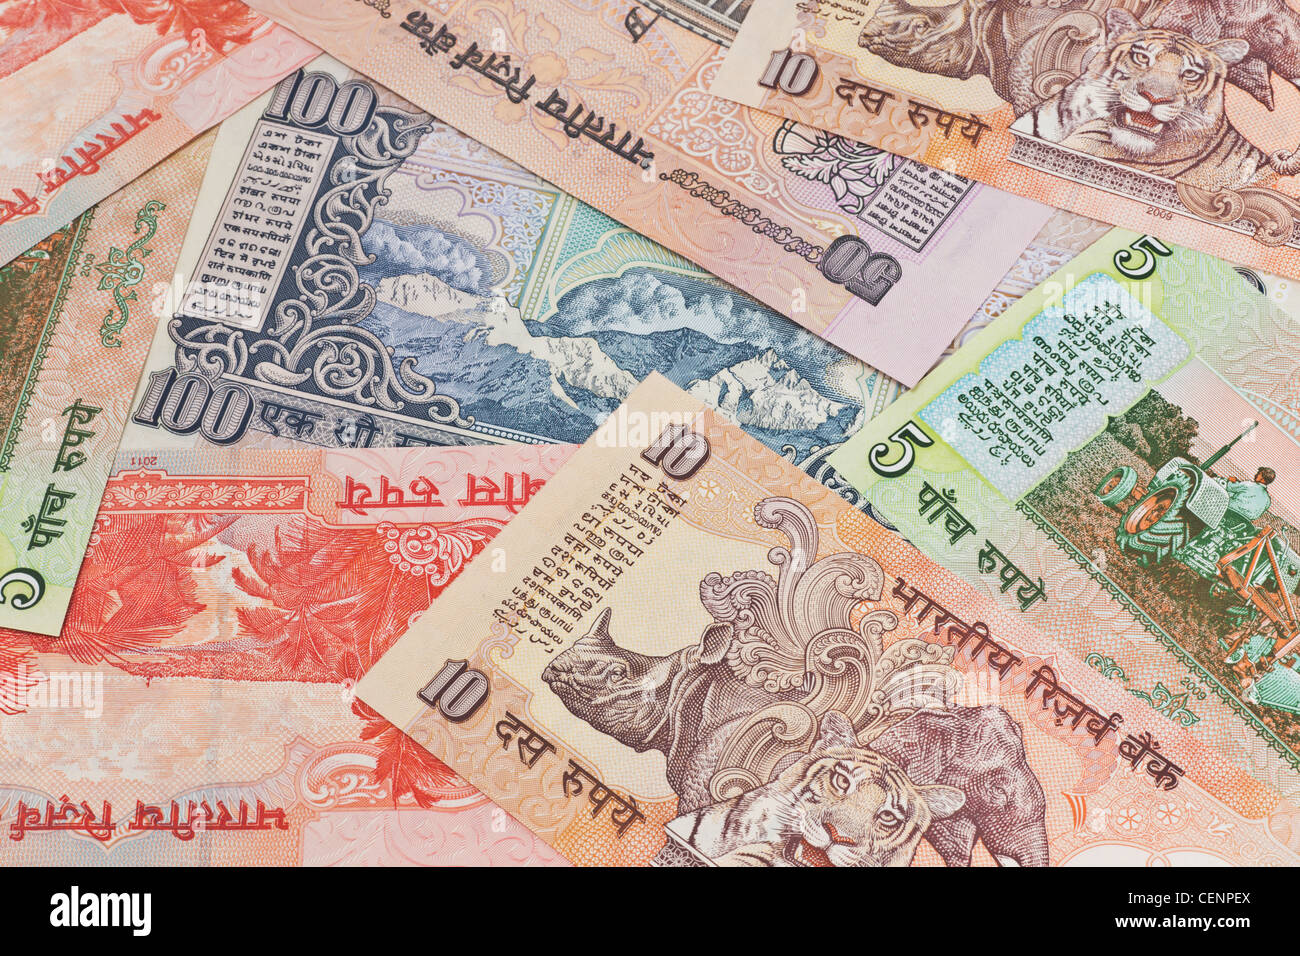 many Indian rupees bills lying side by side, India, Asia Stock Photo